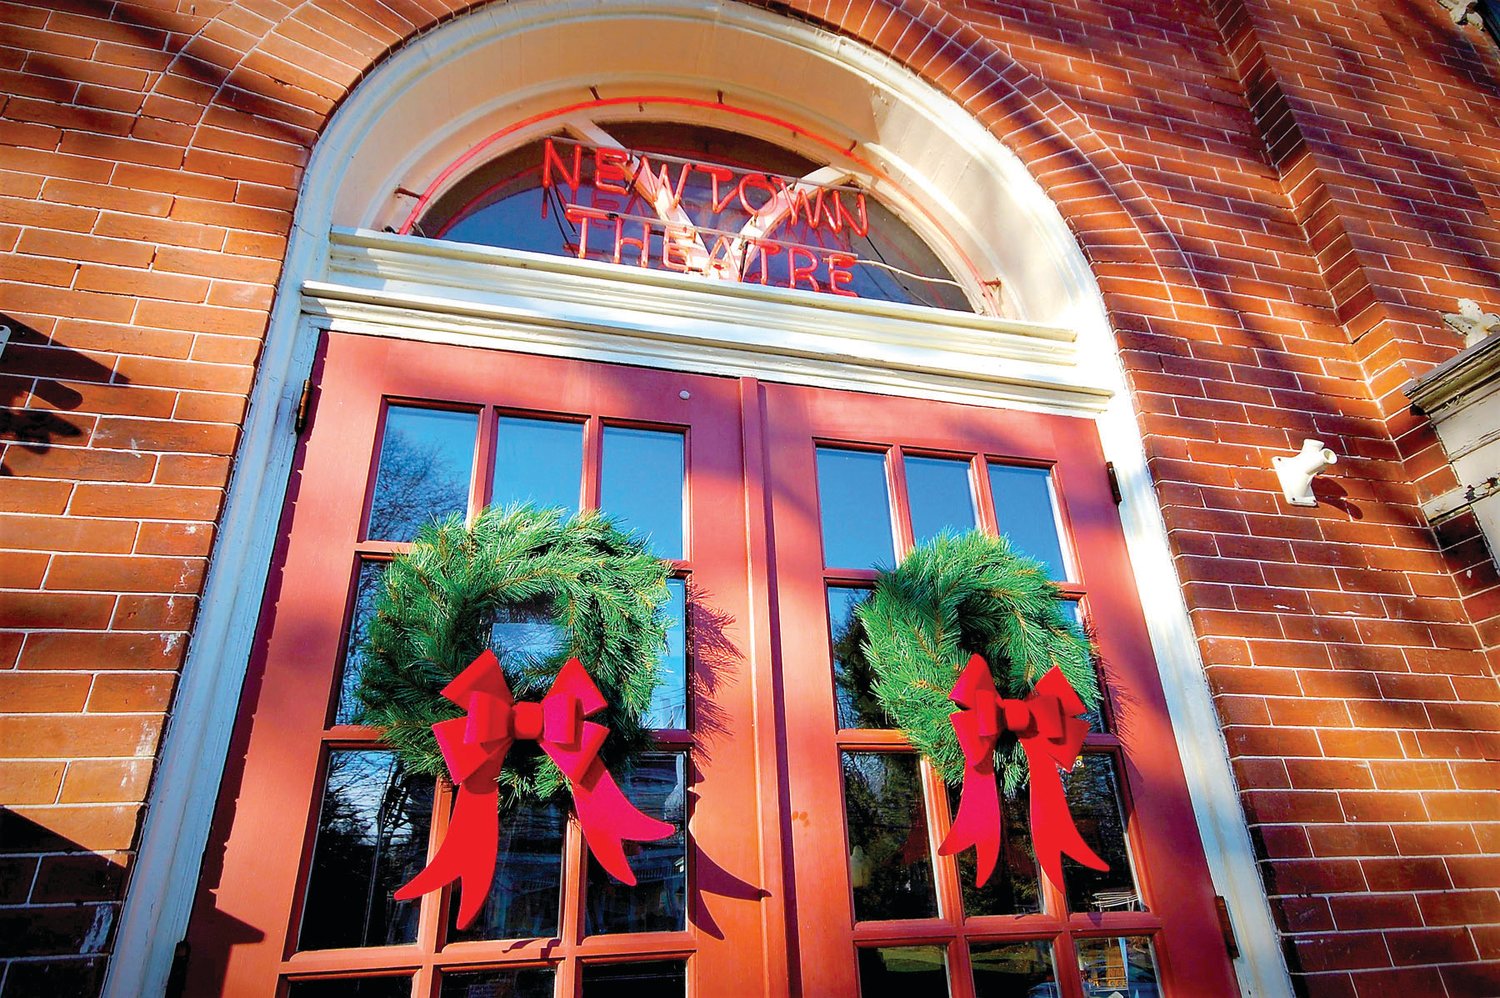 The Newtown Theatre is decorated for the holidays.